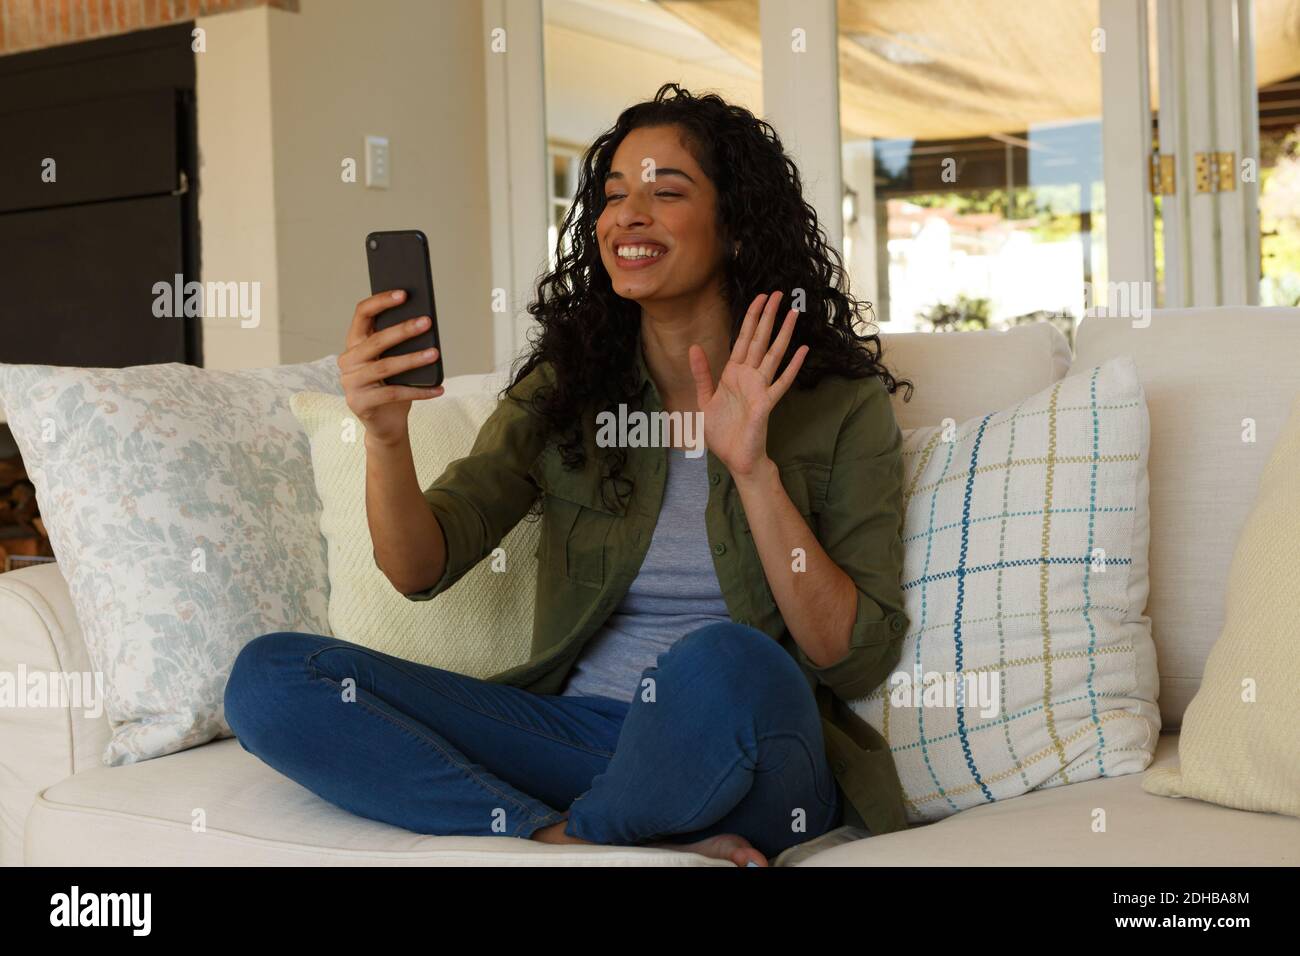 Mixed race woman having video chat on smartphone waving Stock Photo